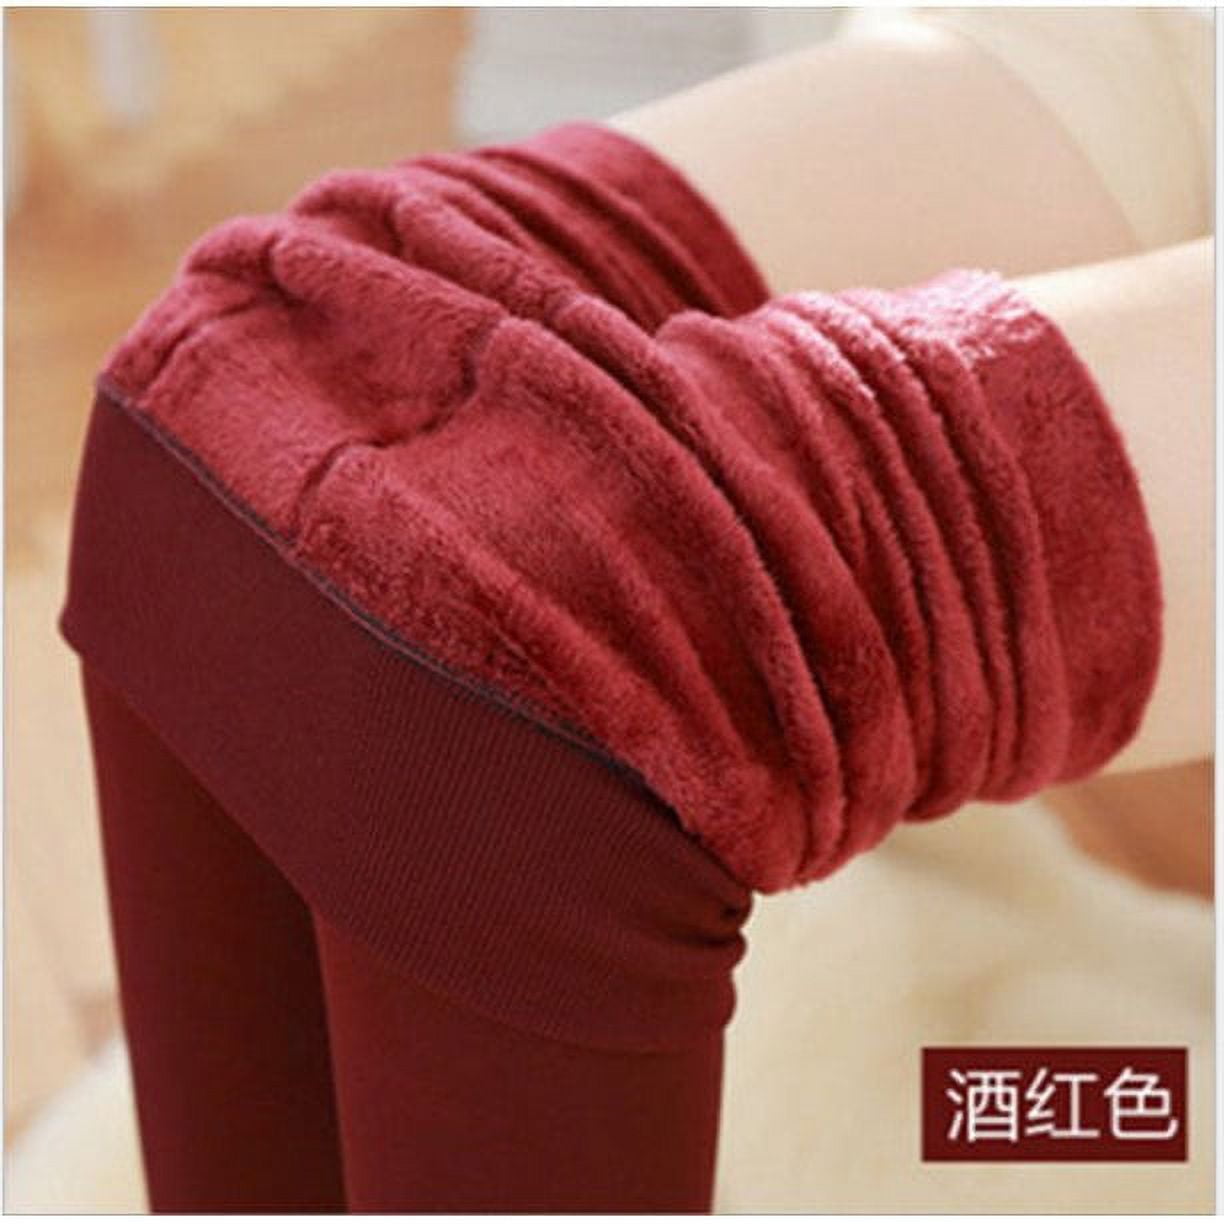 Puloru New Women Thick Warm Fleece Lined Thermal Stretchy Slim